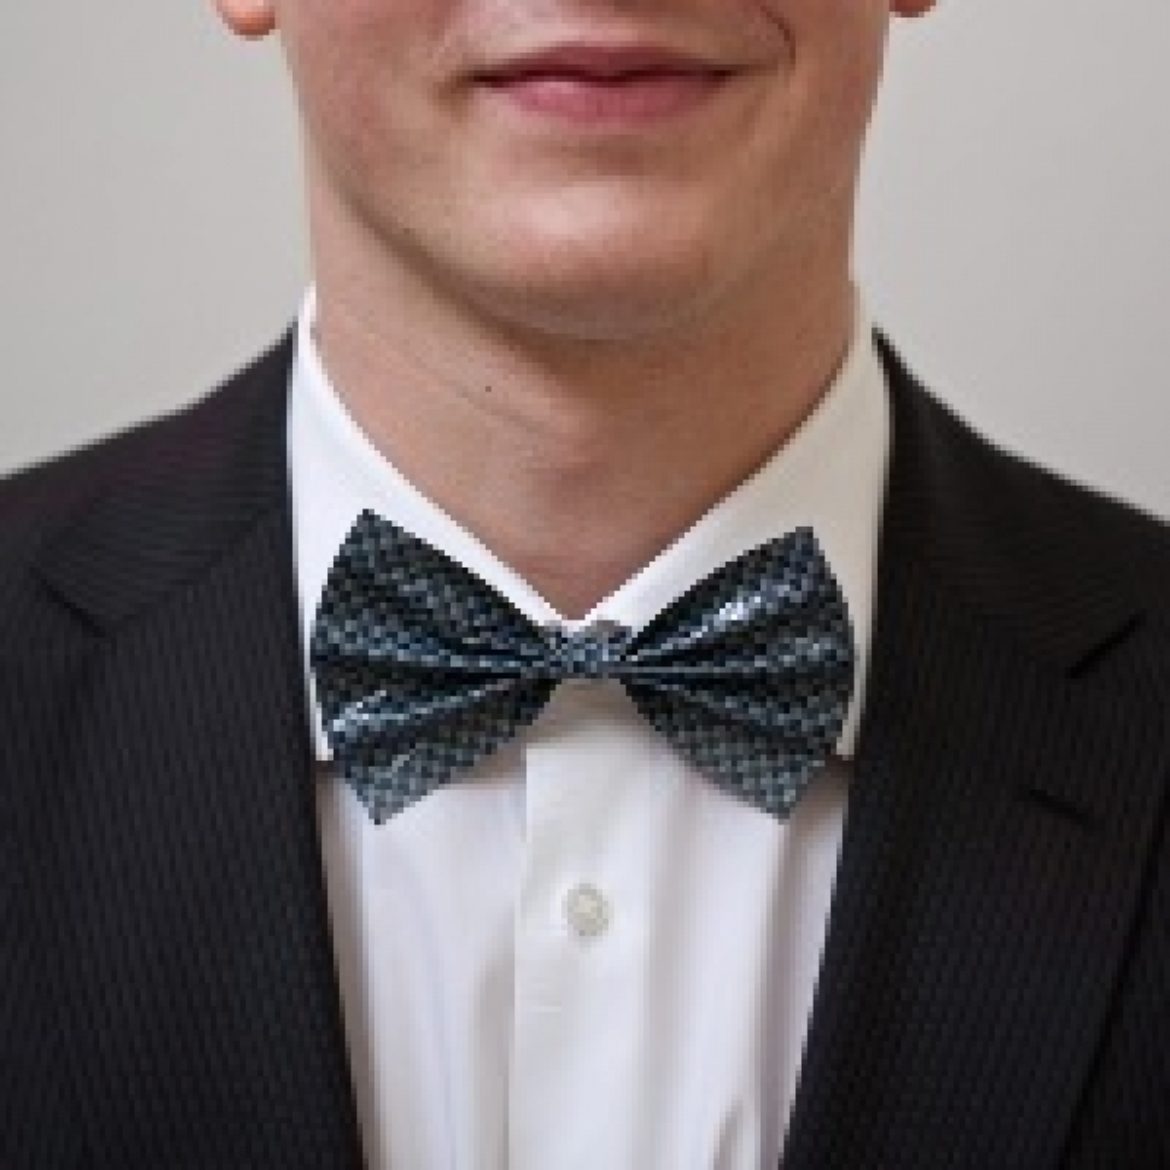 Finished Duck Tape Bow Tie worn by a young man in a suit